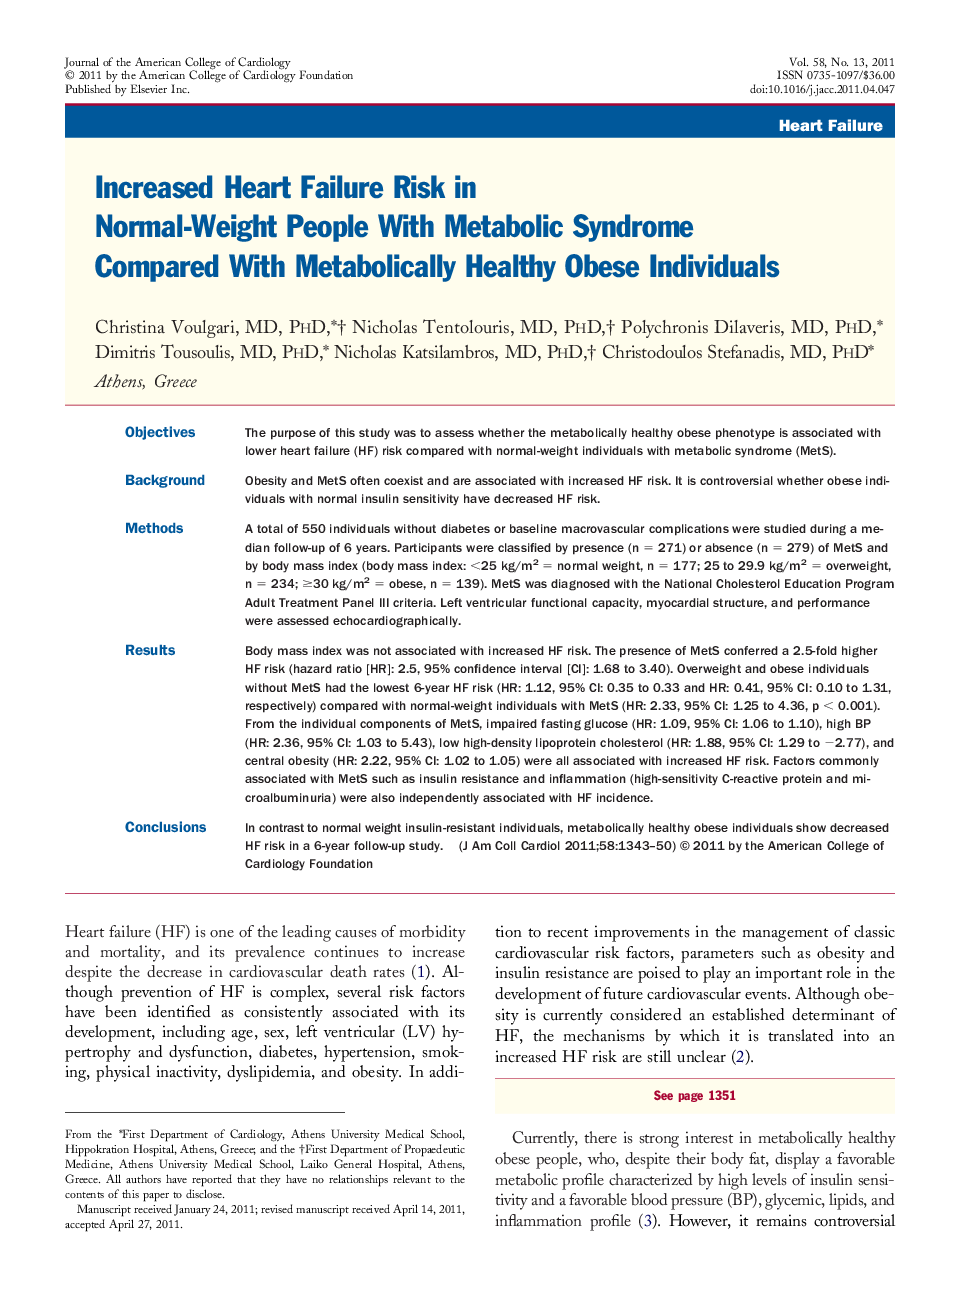 Increased Heart Failure Risk in Normal-Weight People With Metabolic Syndrome Compared With Metabolically Healthy Obese Individuals 